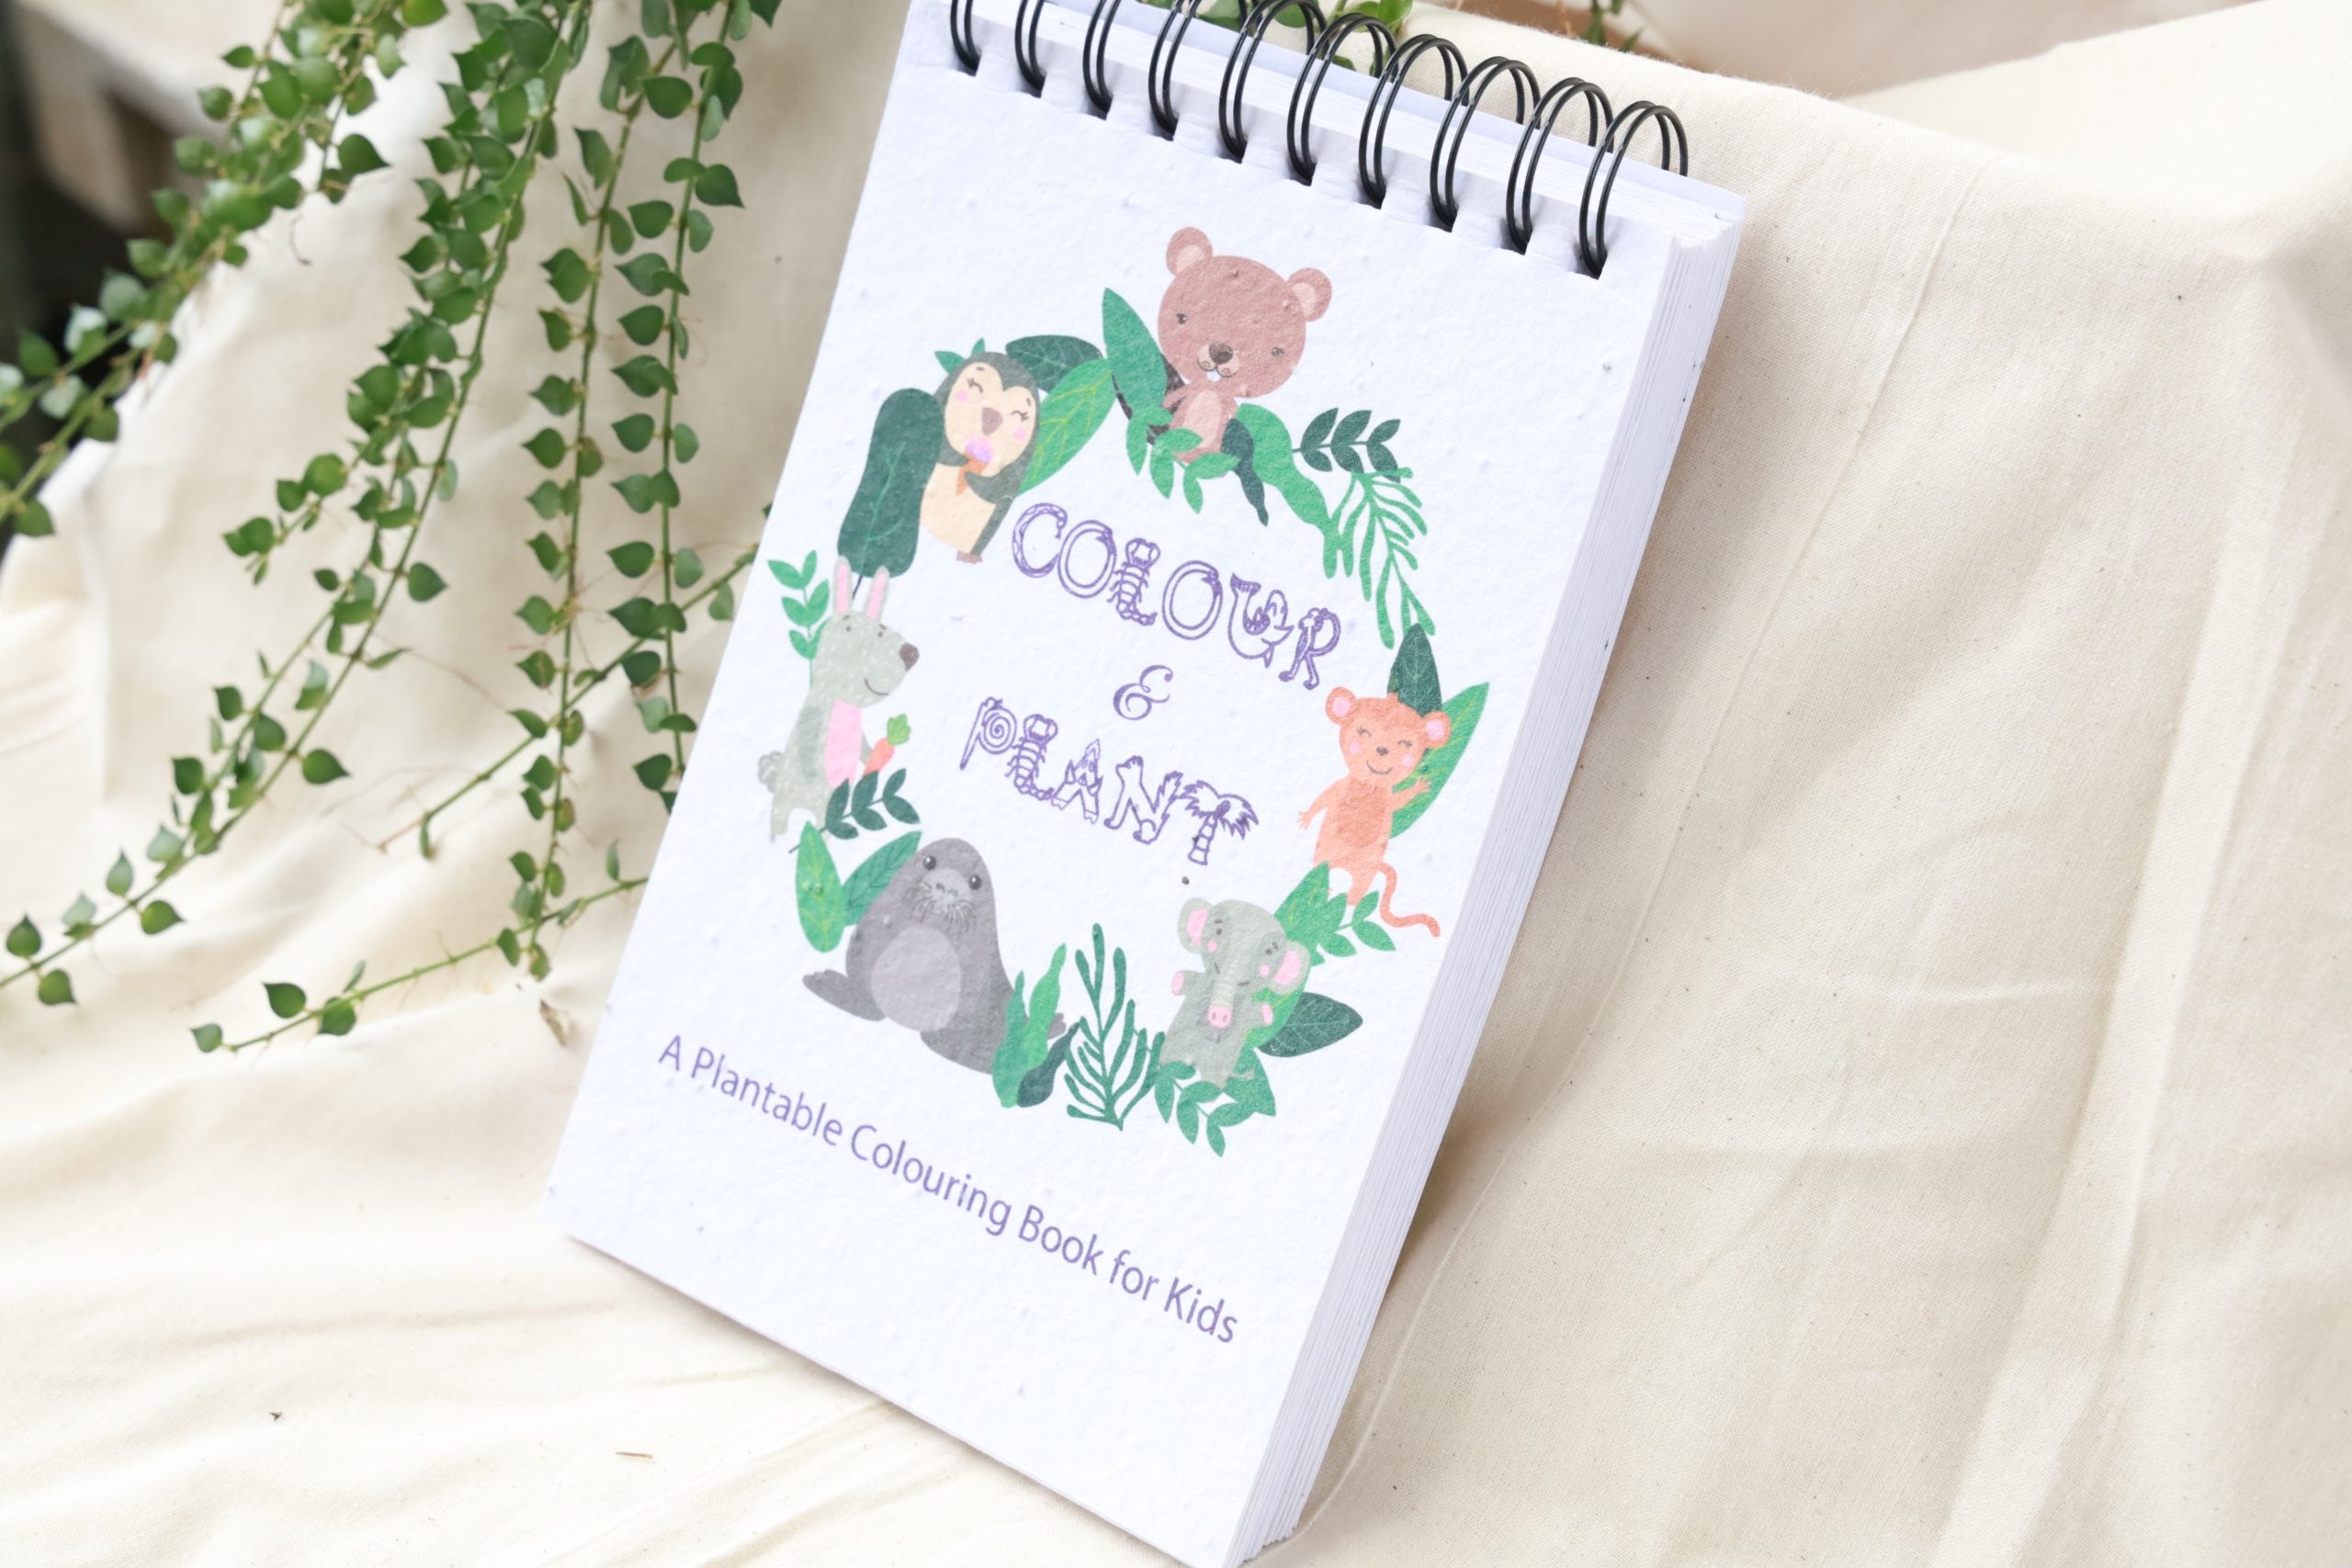 Purple & Pure Colouring Gift Kit | Buy at The Green Collective